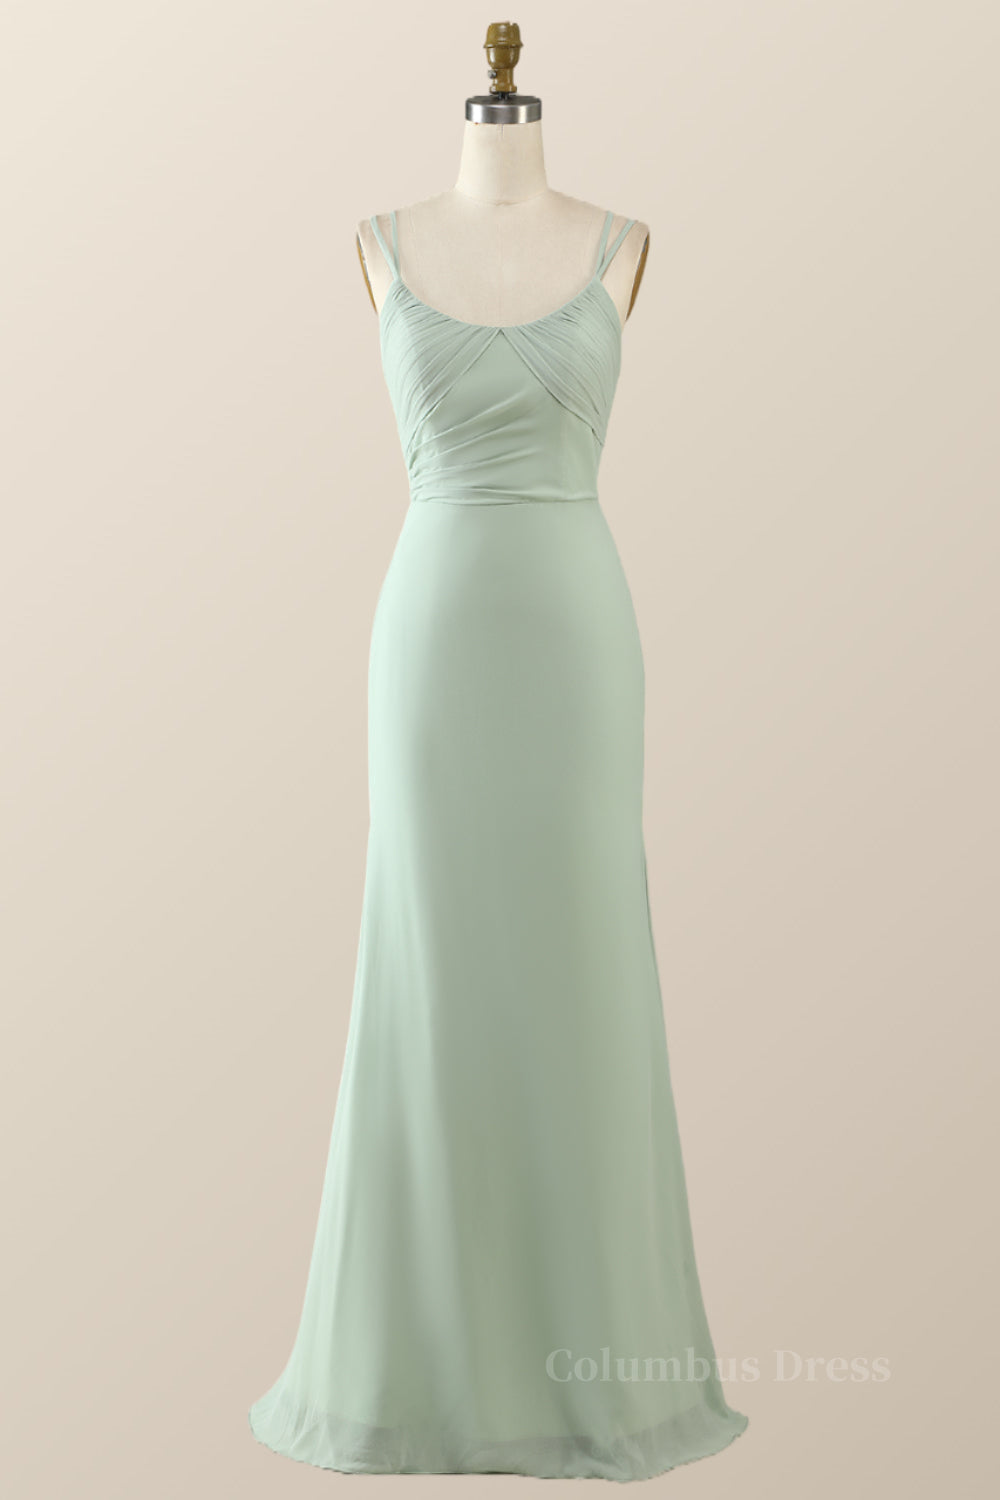 Scoop Mint Green Chiffon Pleated Long Corset Bridesmaid Dress outfit, Bridesmaids Dresses Near Me